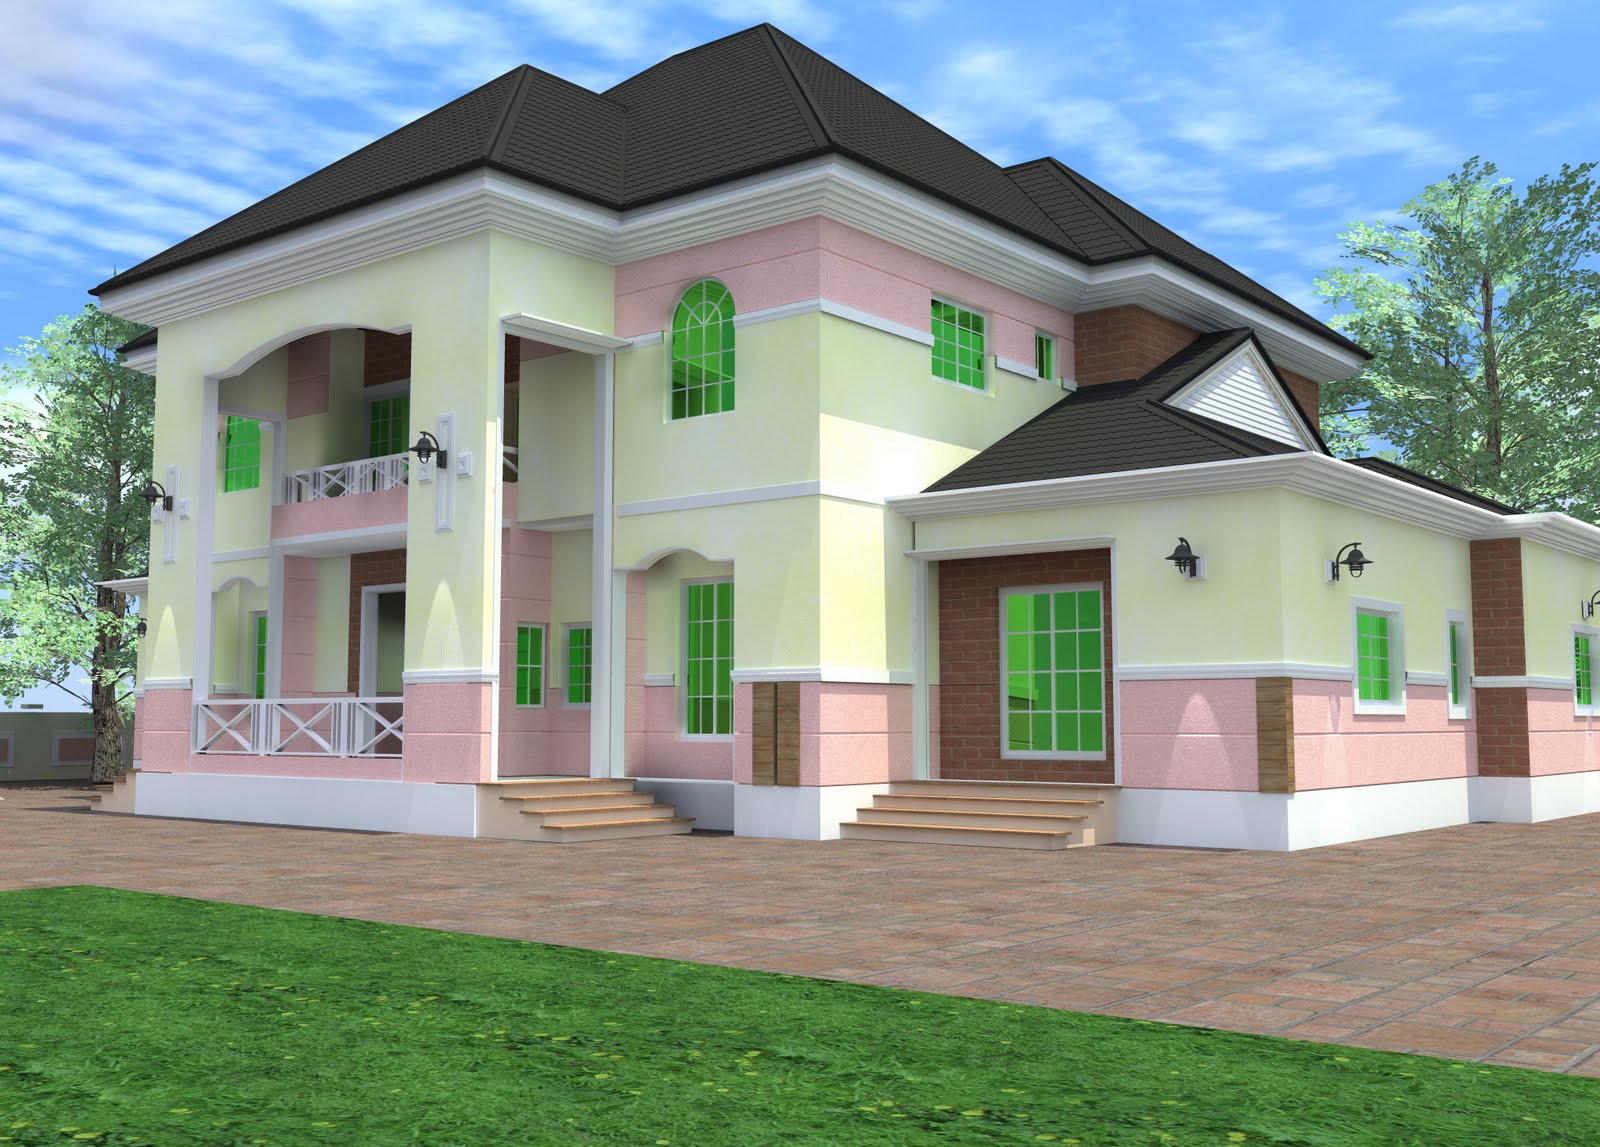 Residential Homes  and Public Designs 6  Bedroom  duplex 